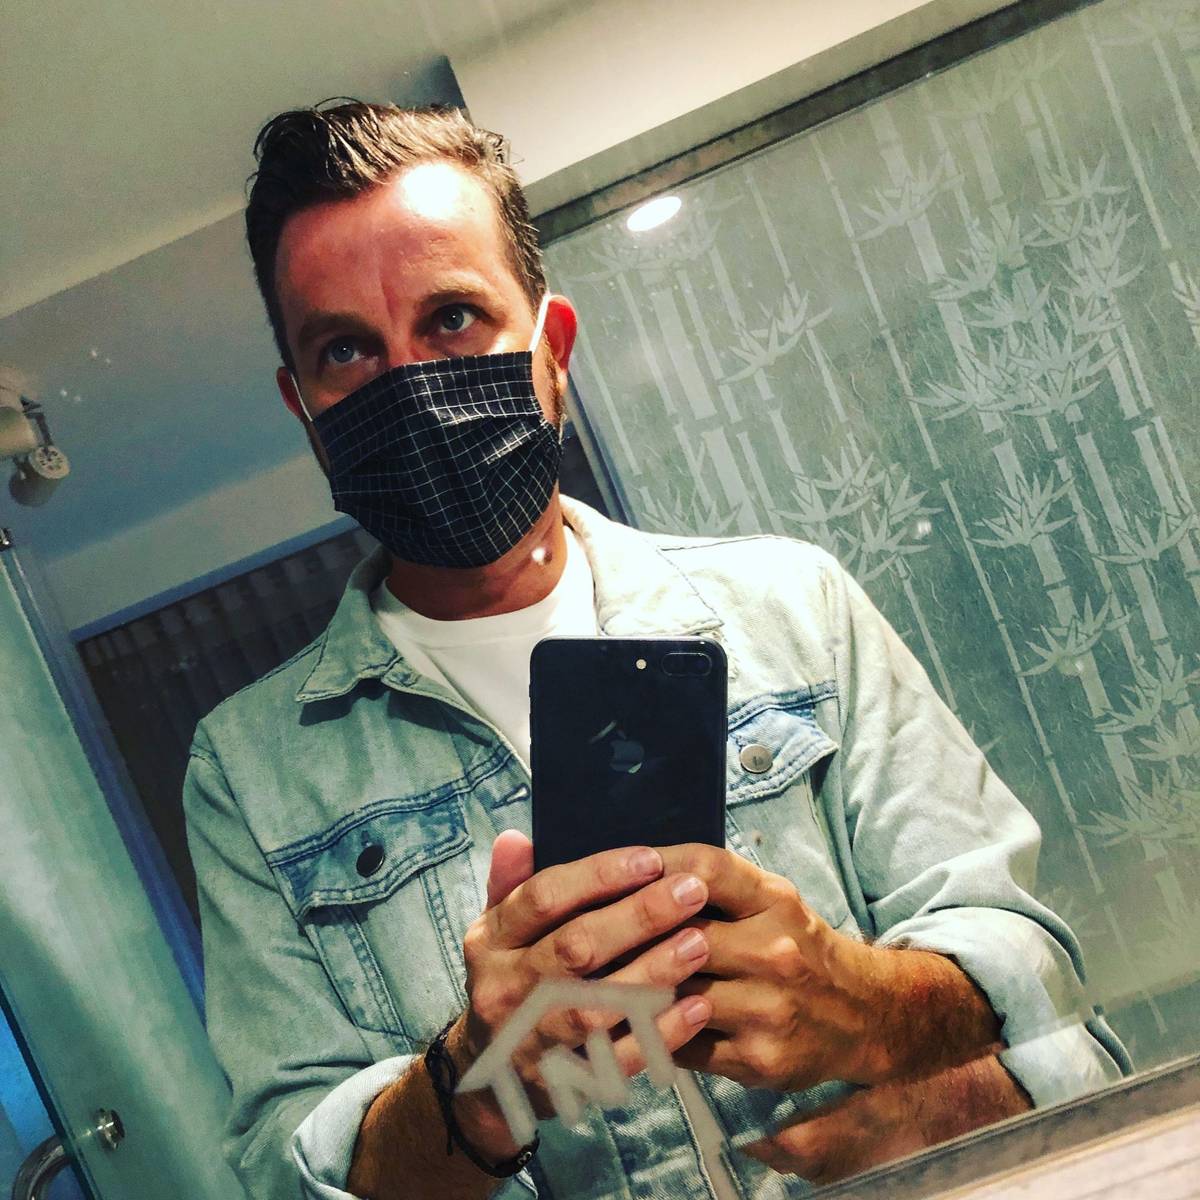 I needed to mask up just to deal with the smog in Saigon